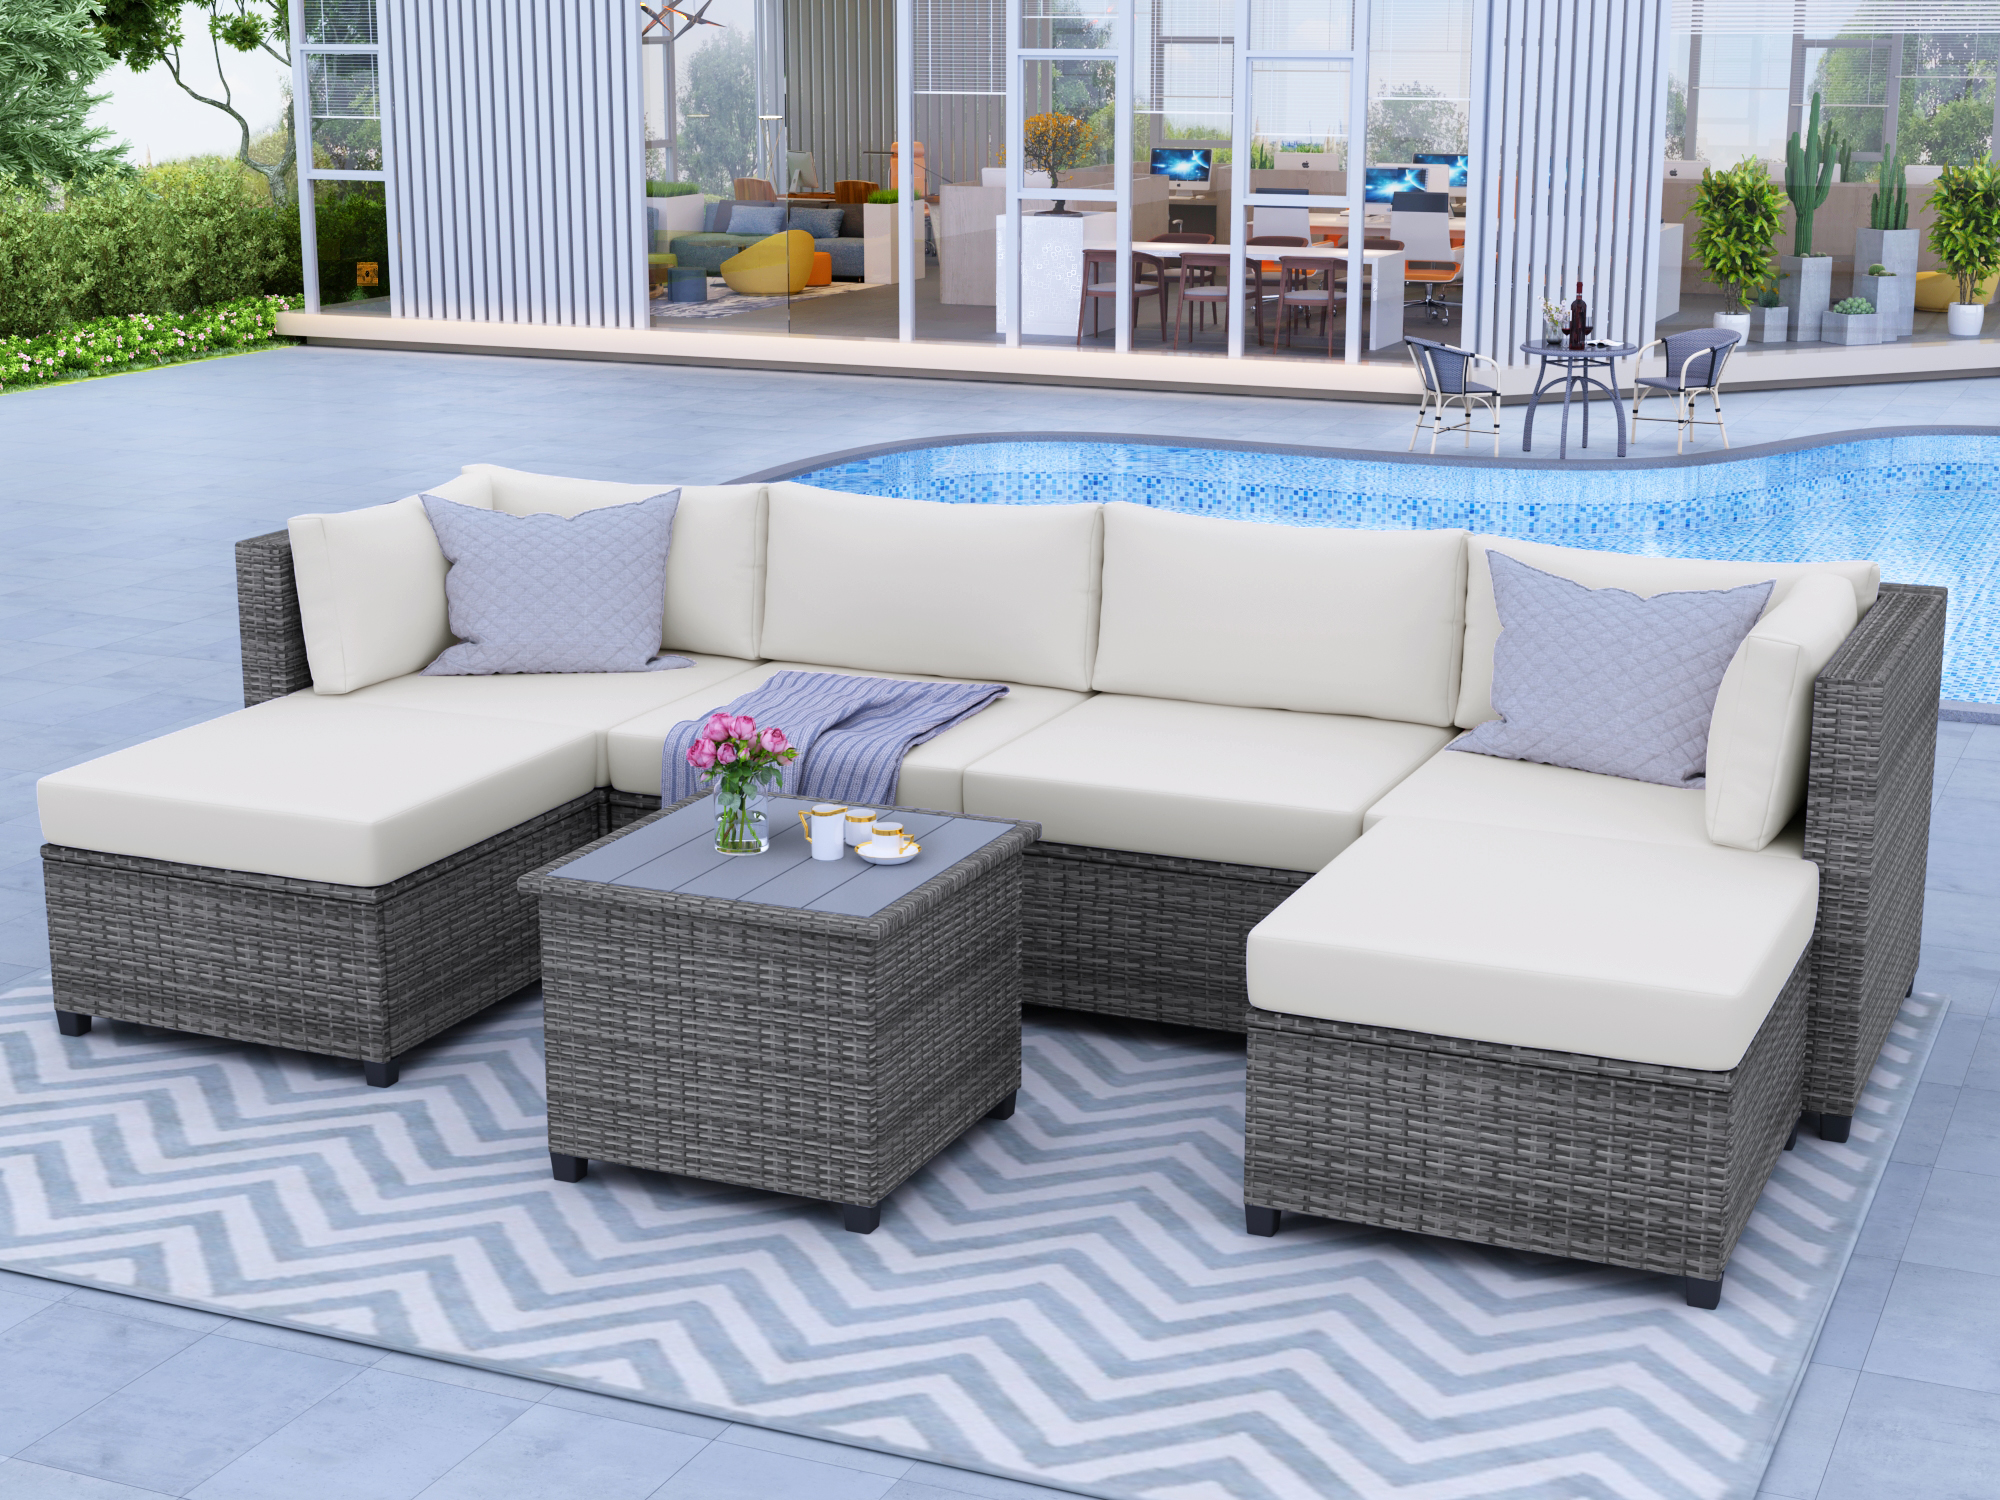 7 Piece Patio Sectional Sofa Set with 4 PE Wicker Sofas, 2 Ottoman, Coffee Table, All-Weather Outdoor Conversation Set Patio Furniture Sets with Beige Cushions for Backyard, Porch, Garden, Pool, LLL19 - image 1 of 9